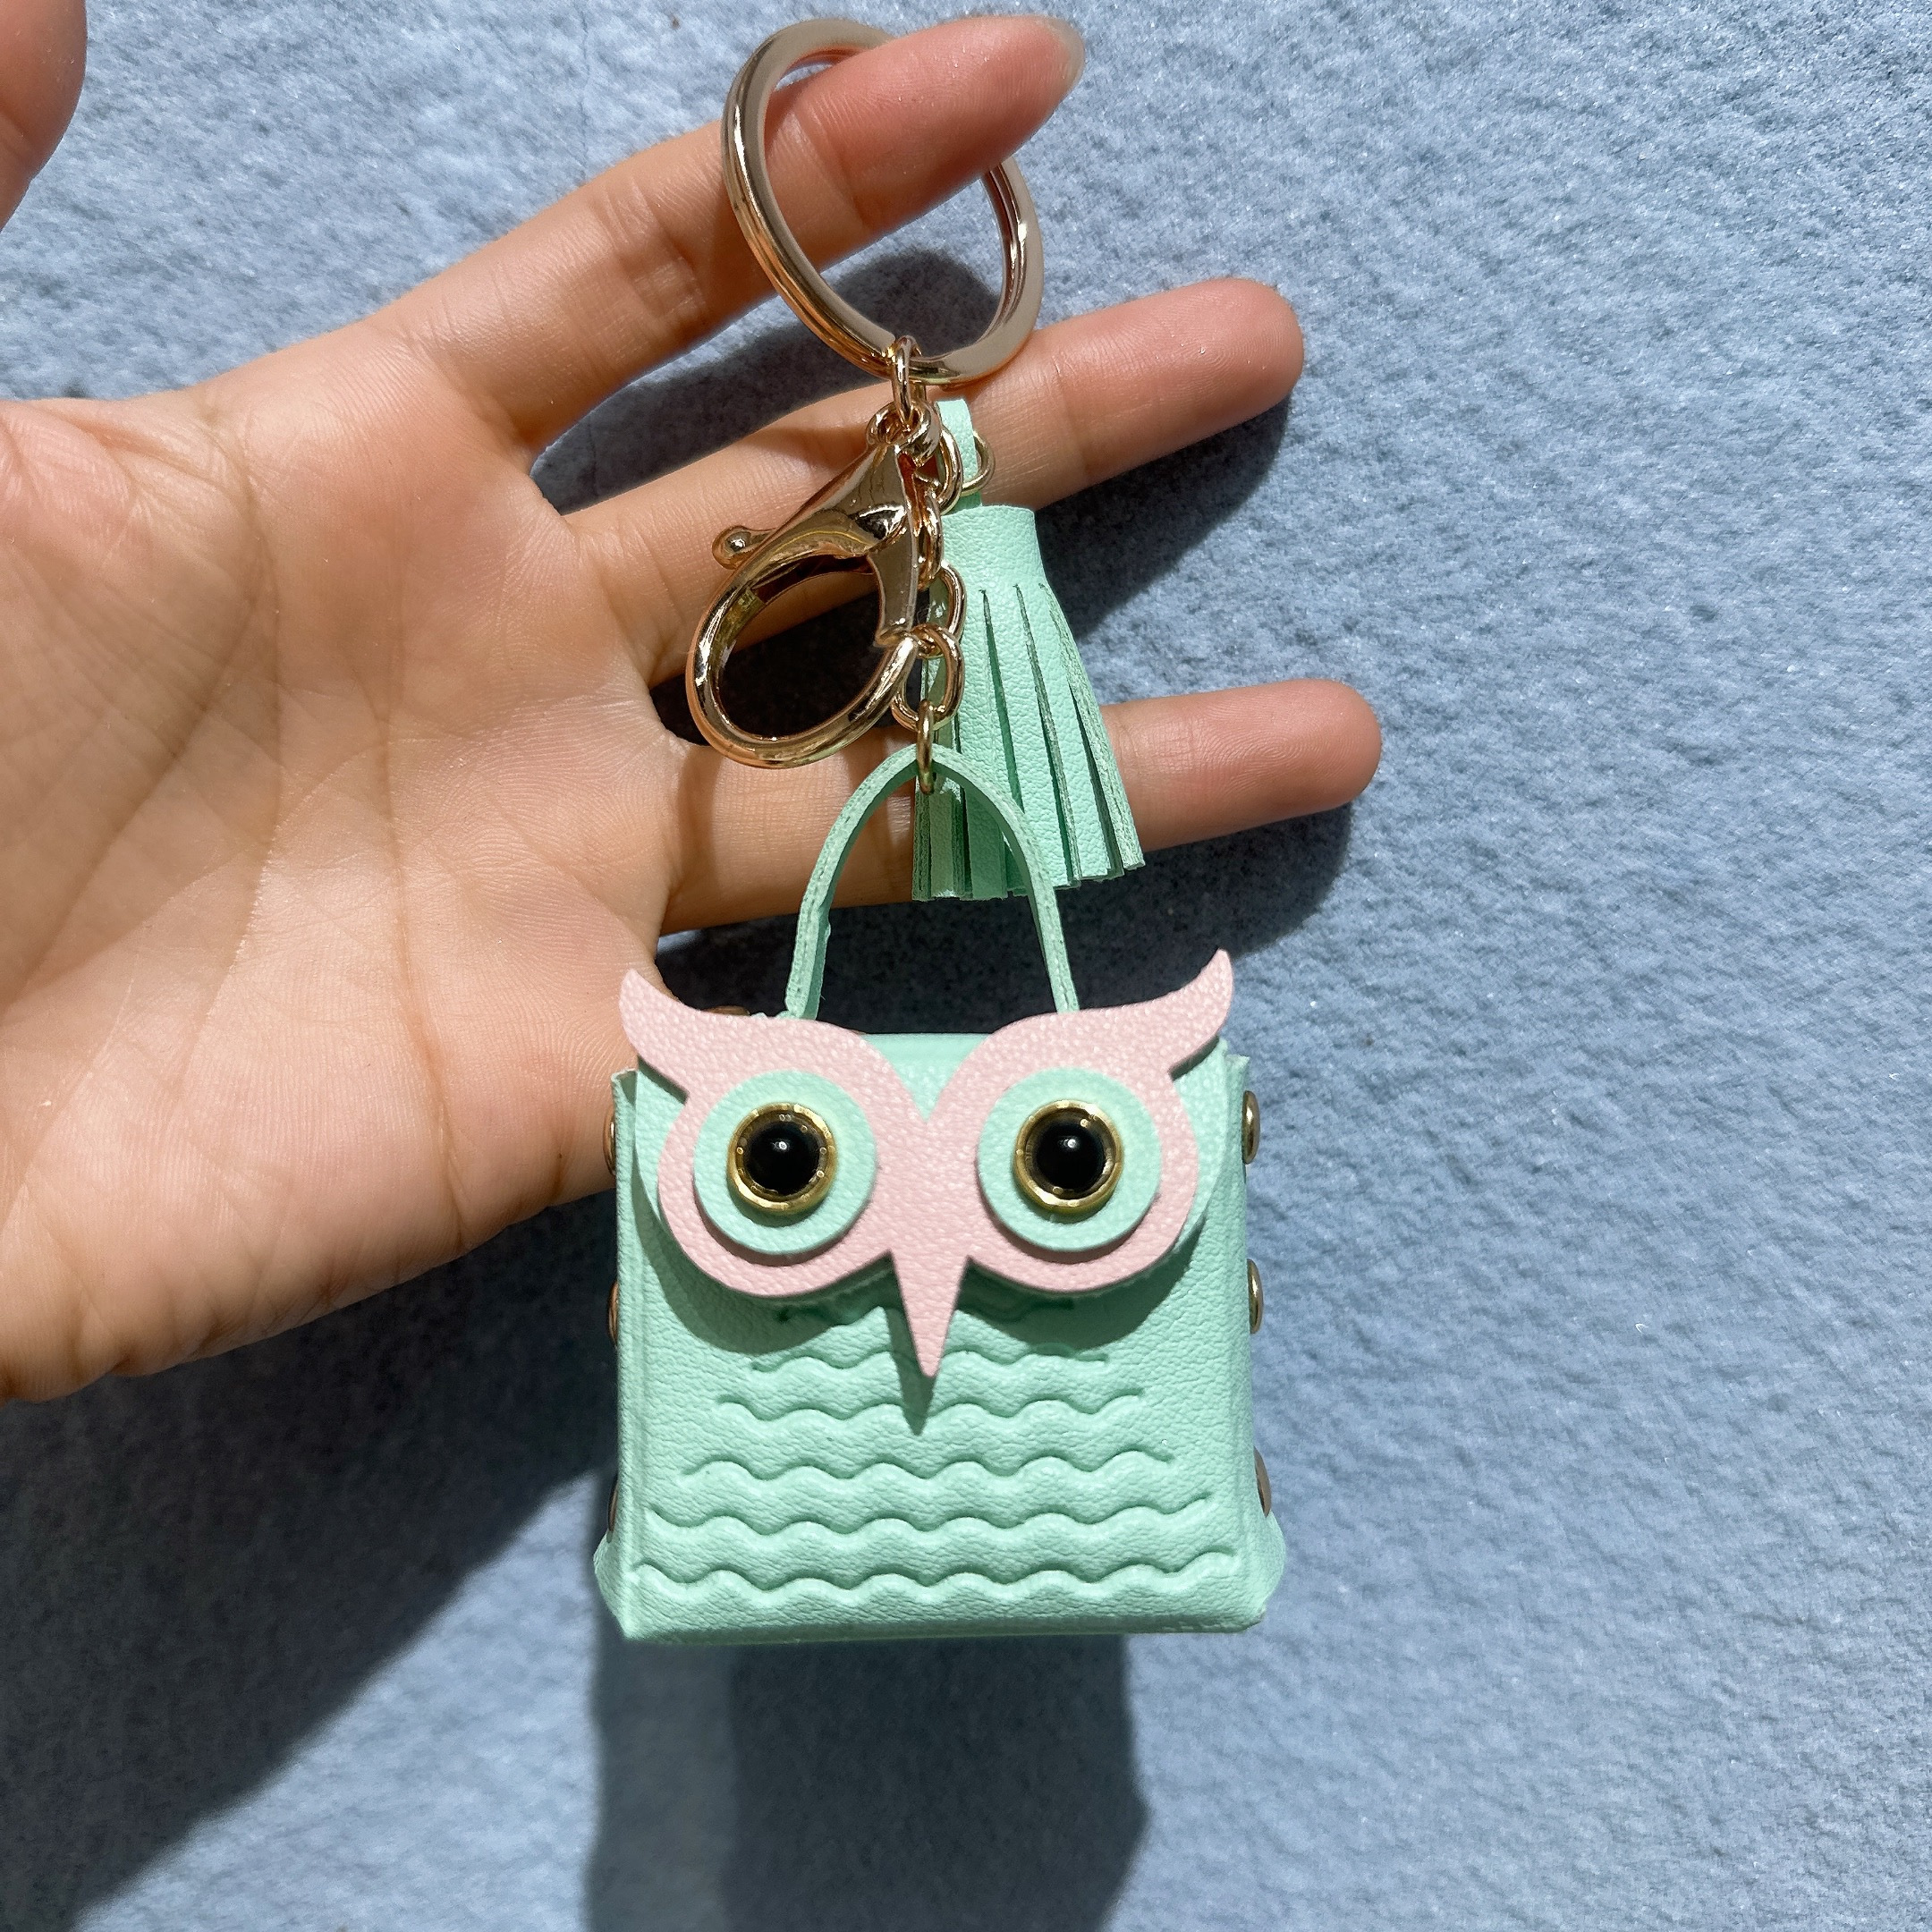 Accessories, New Bag Charm Brown Owl Zip Backpack Keychain